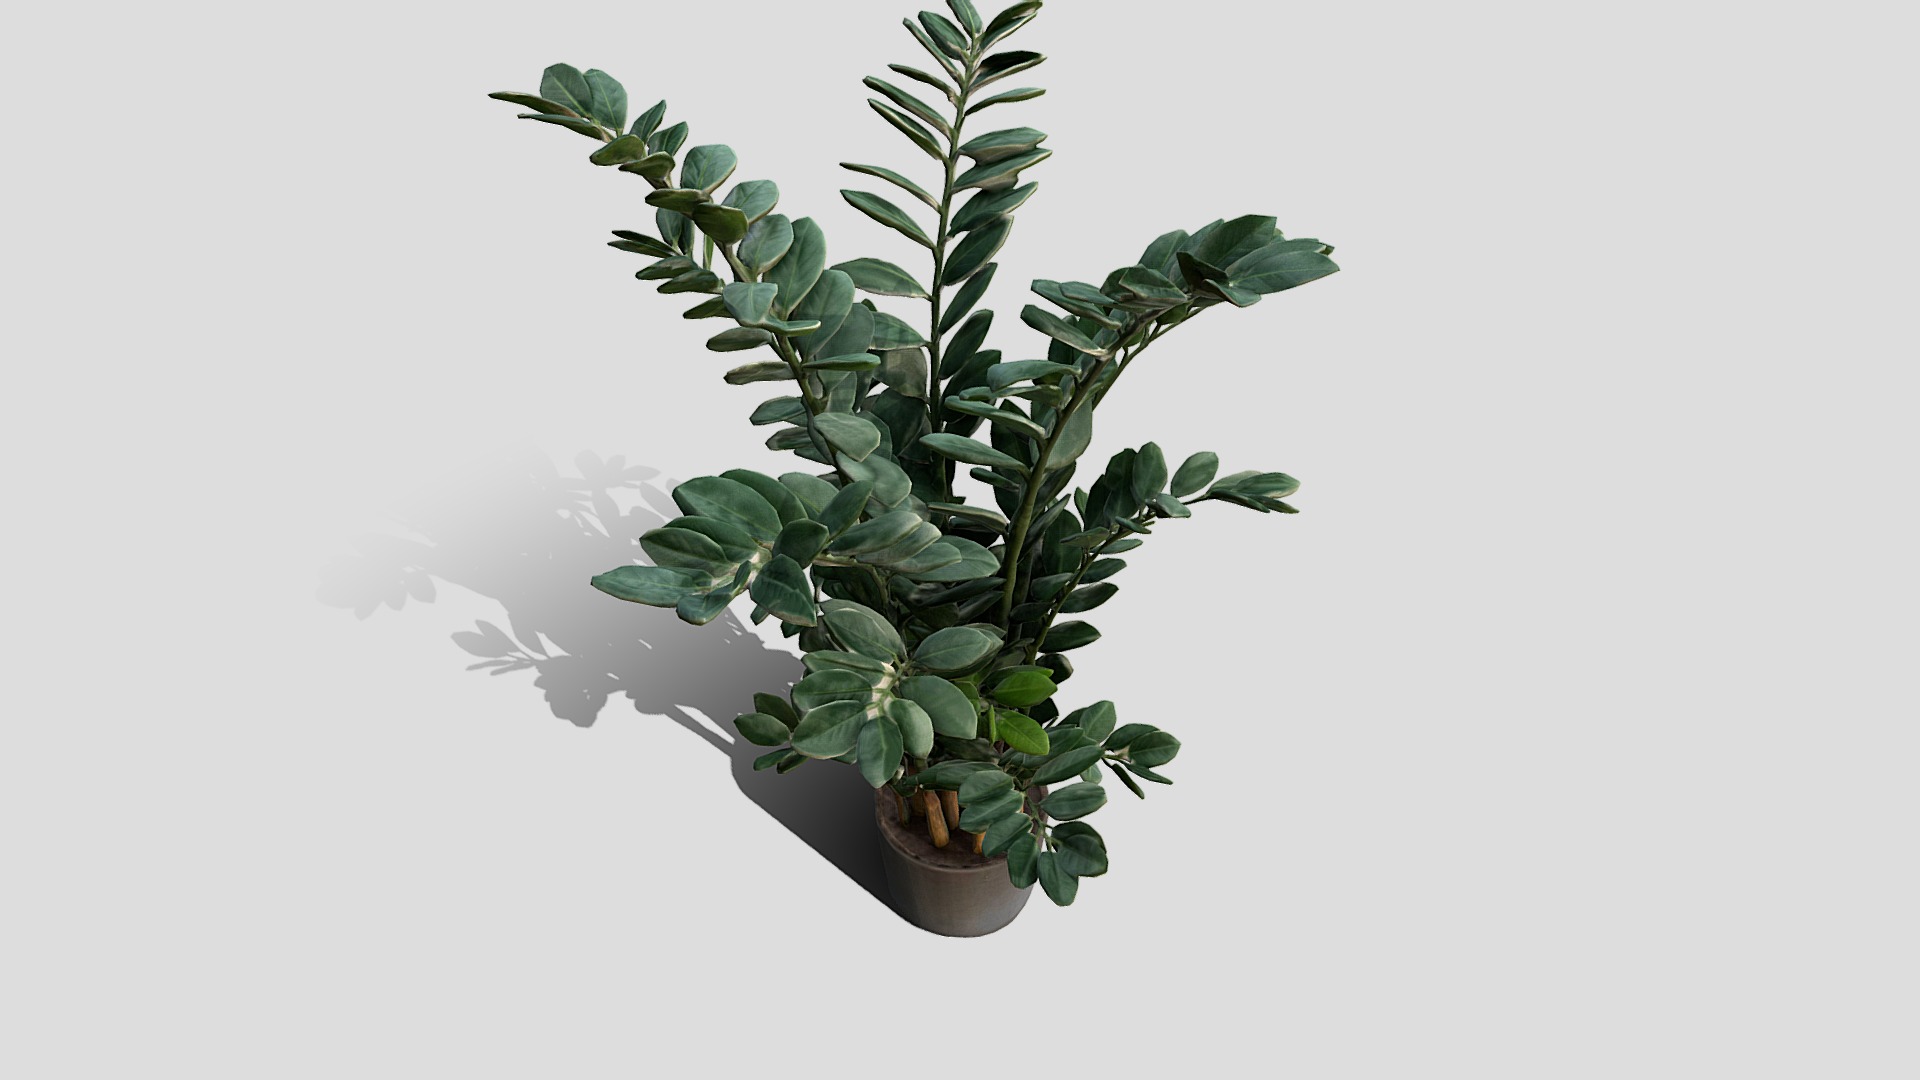 3D model 000056_151412 - This is a 3D model of the 000056_151412. The 3D model is about a plant in a pot.